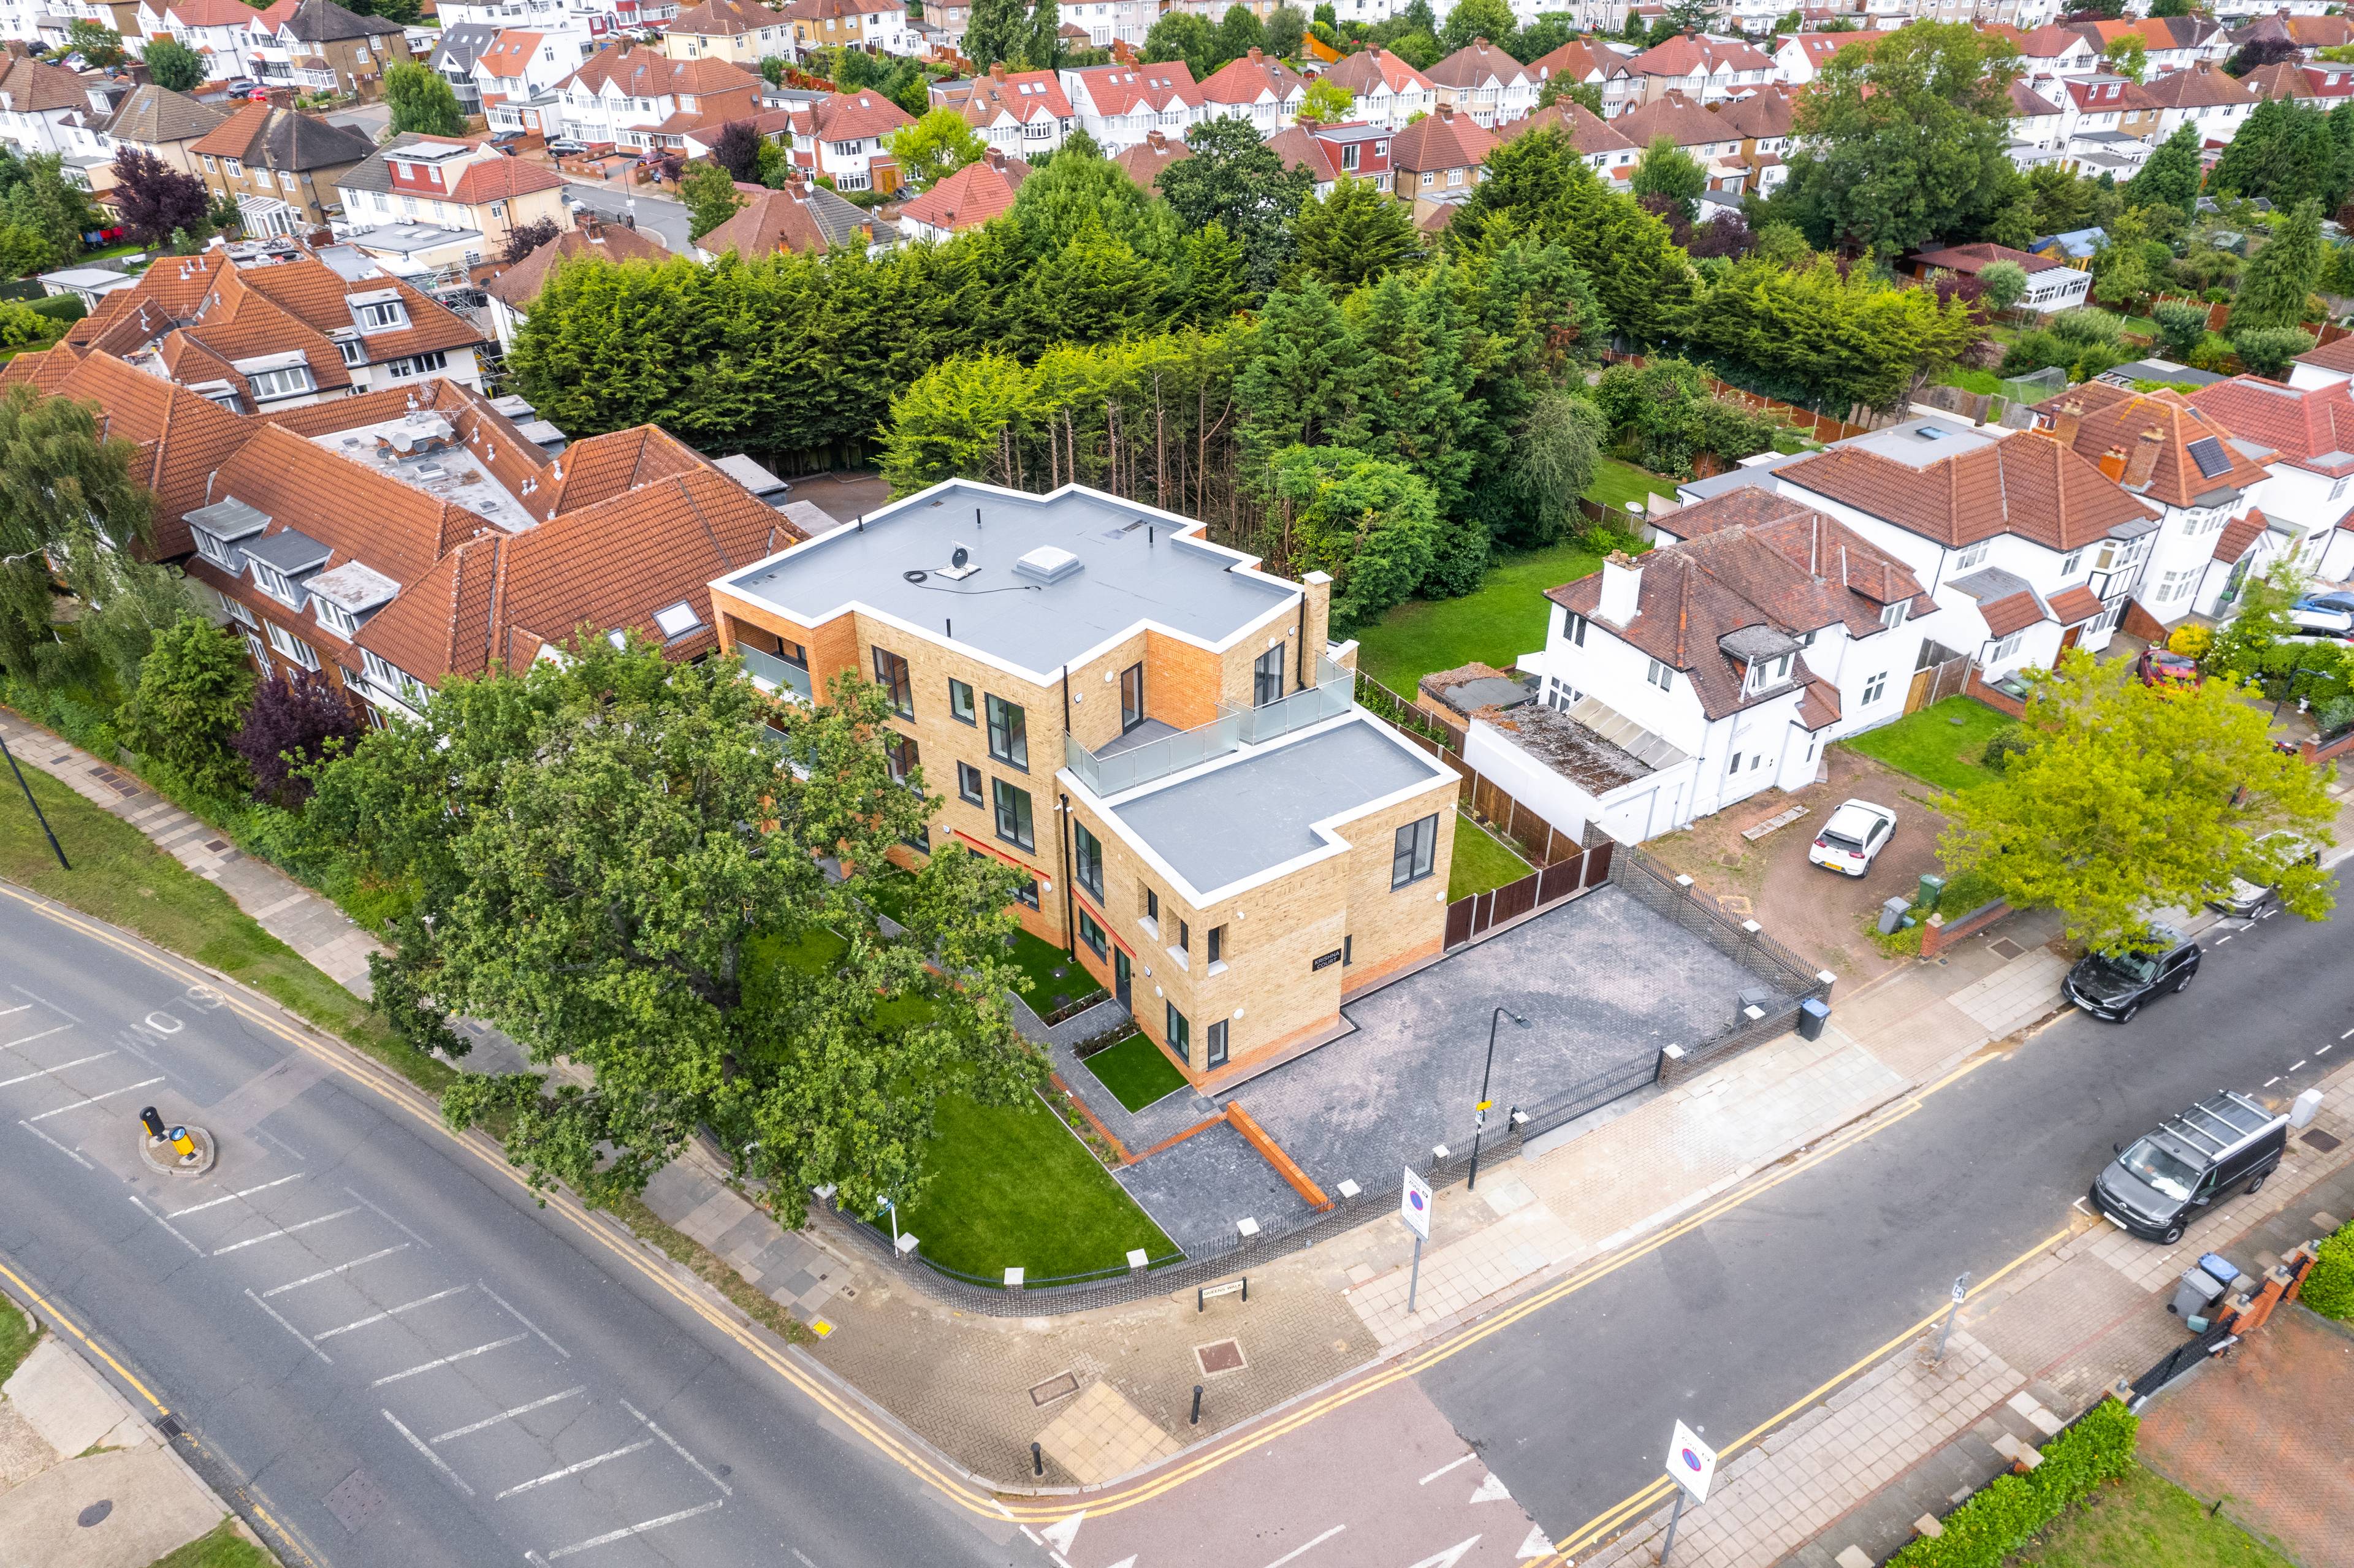 RESIDENTIAL UNBROKEN FREEHOLD INVESTMENT OPPORTUNITY WITH FURTHER DEVELOPMENT POTENTIAL TO ADD ADDITIONAL APARTMENTS IN THE DESIRABLE WEMBLEY PARK